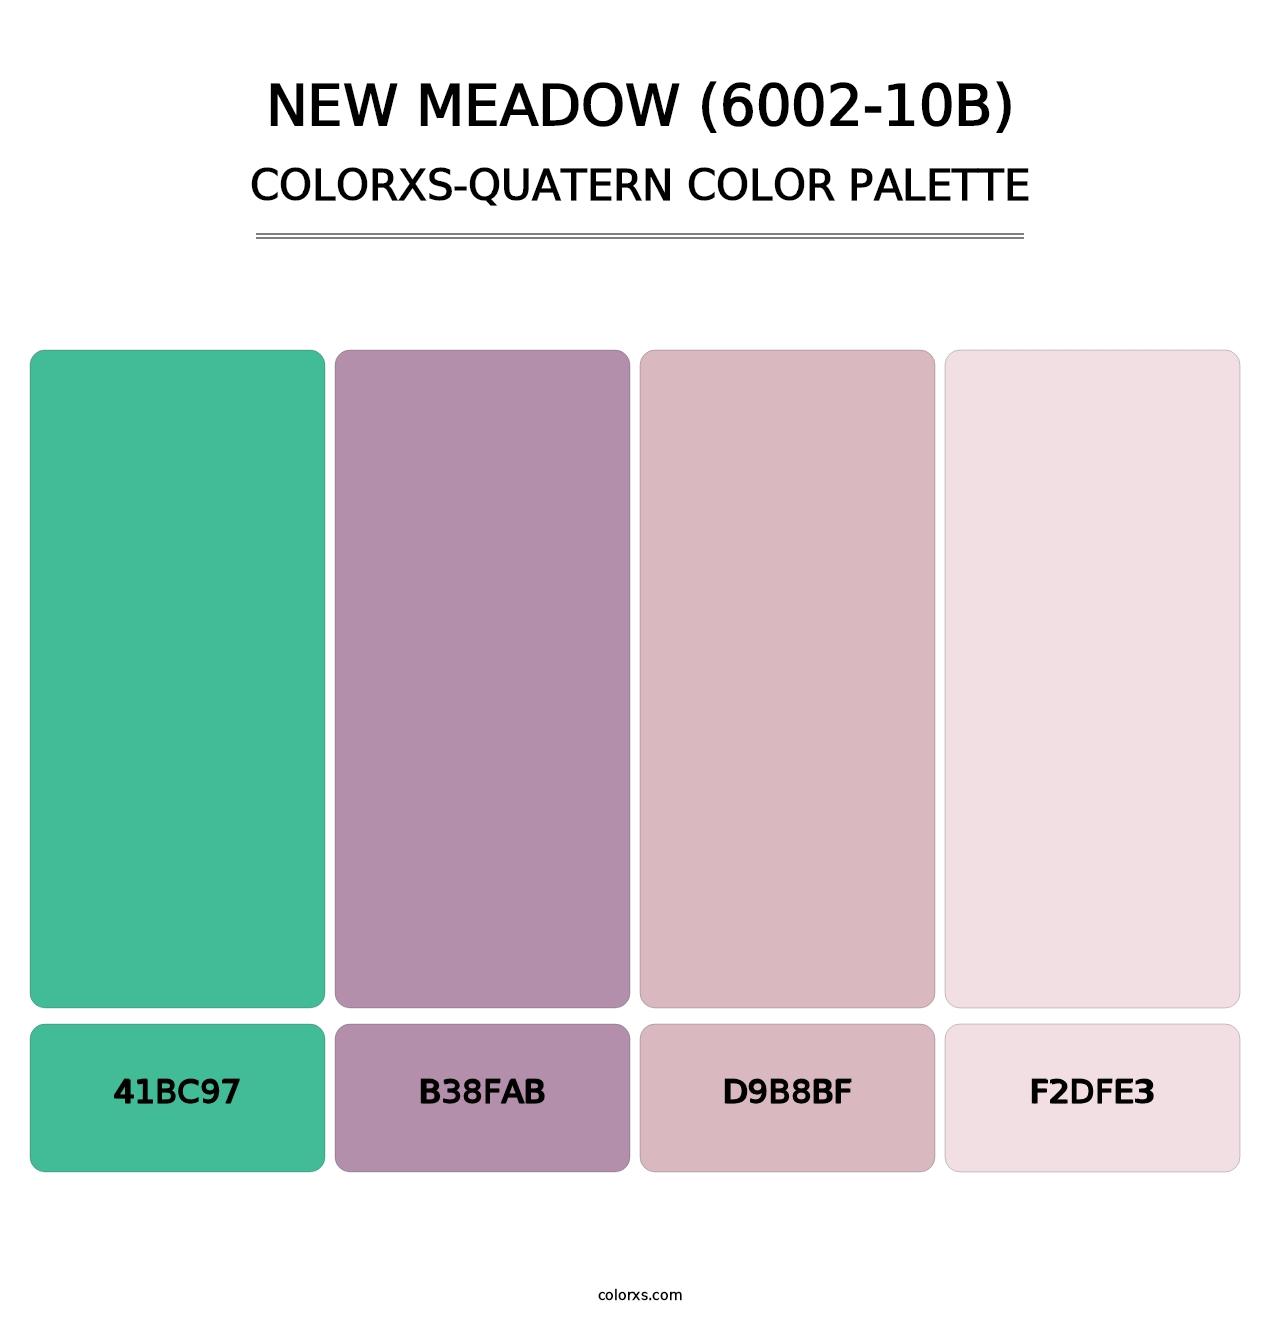 New Meadow (6002-10B) - Colorxs Quatern Palette